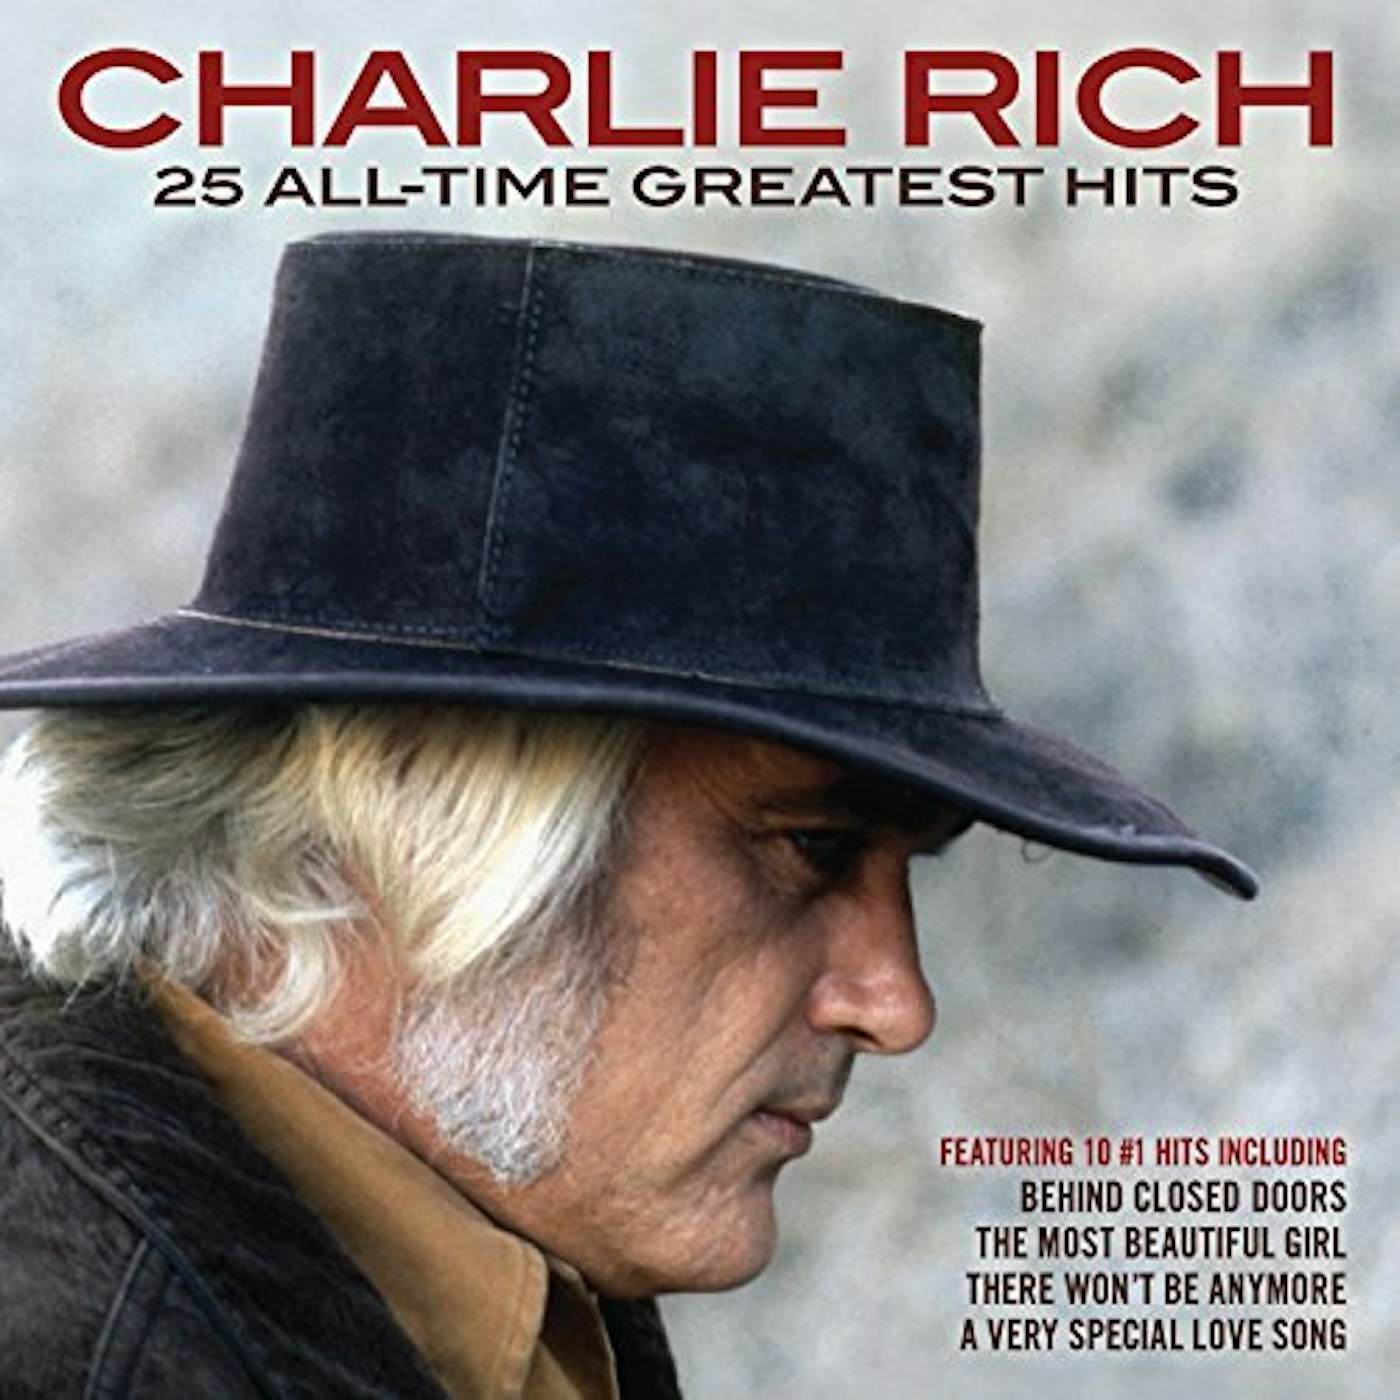 Charlie Rich 25 ALL-TIME GREATEST HITS CD